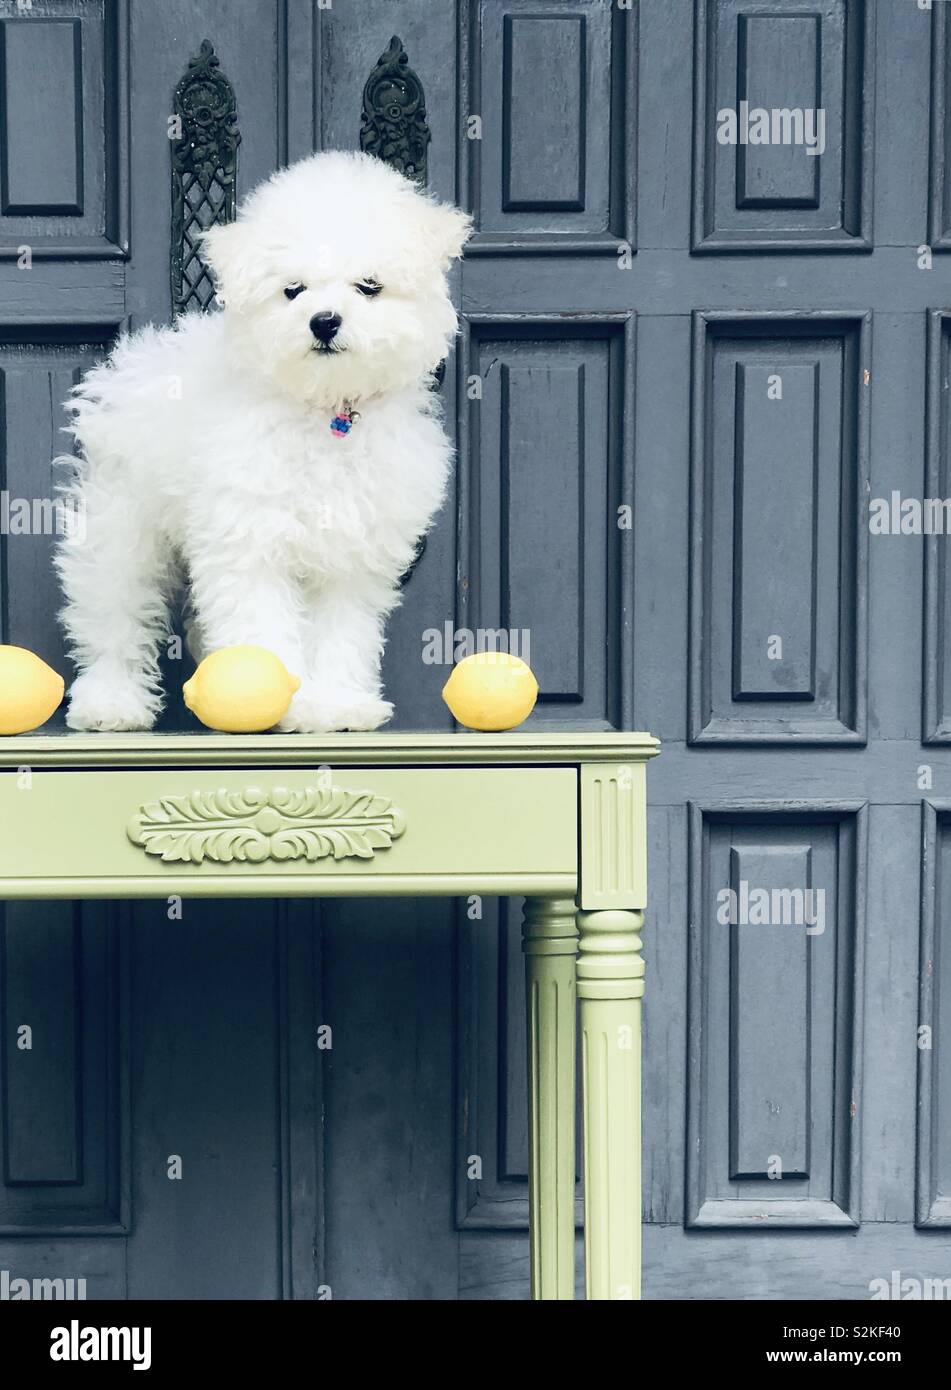 Teddy Puppy in all his fluffy white glory standing atop a pea green table with doors backdrop. Stock Photo